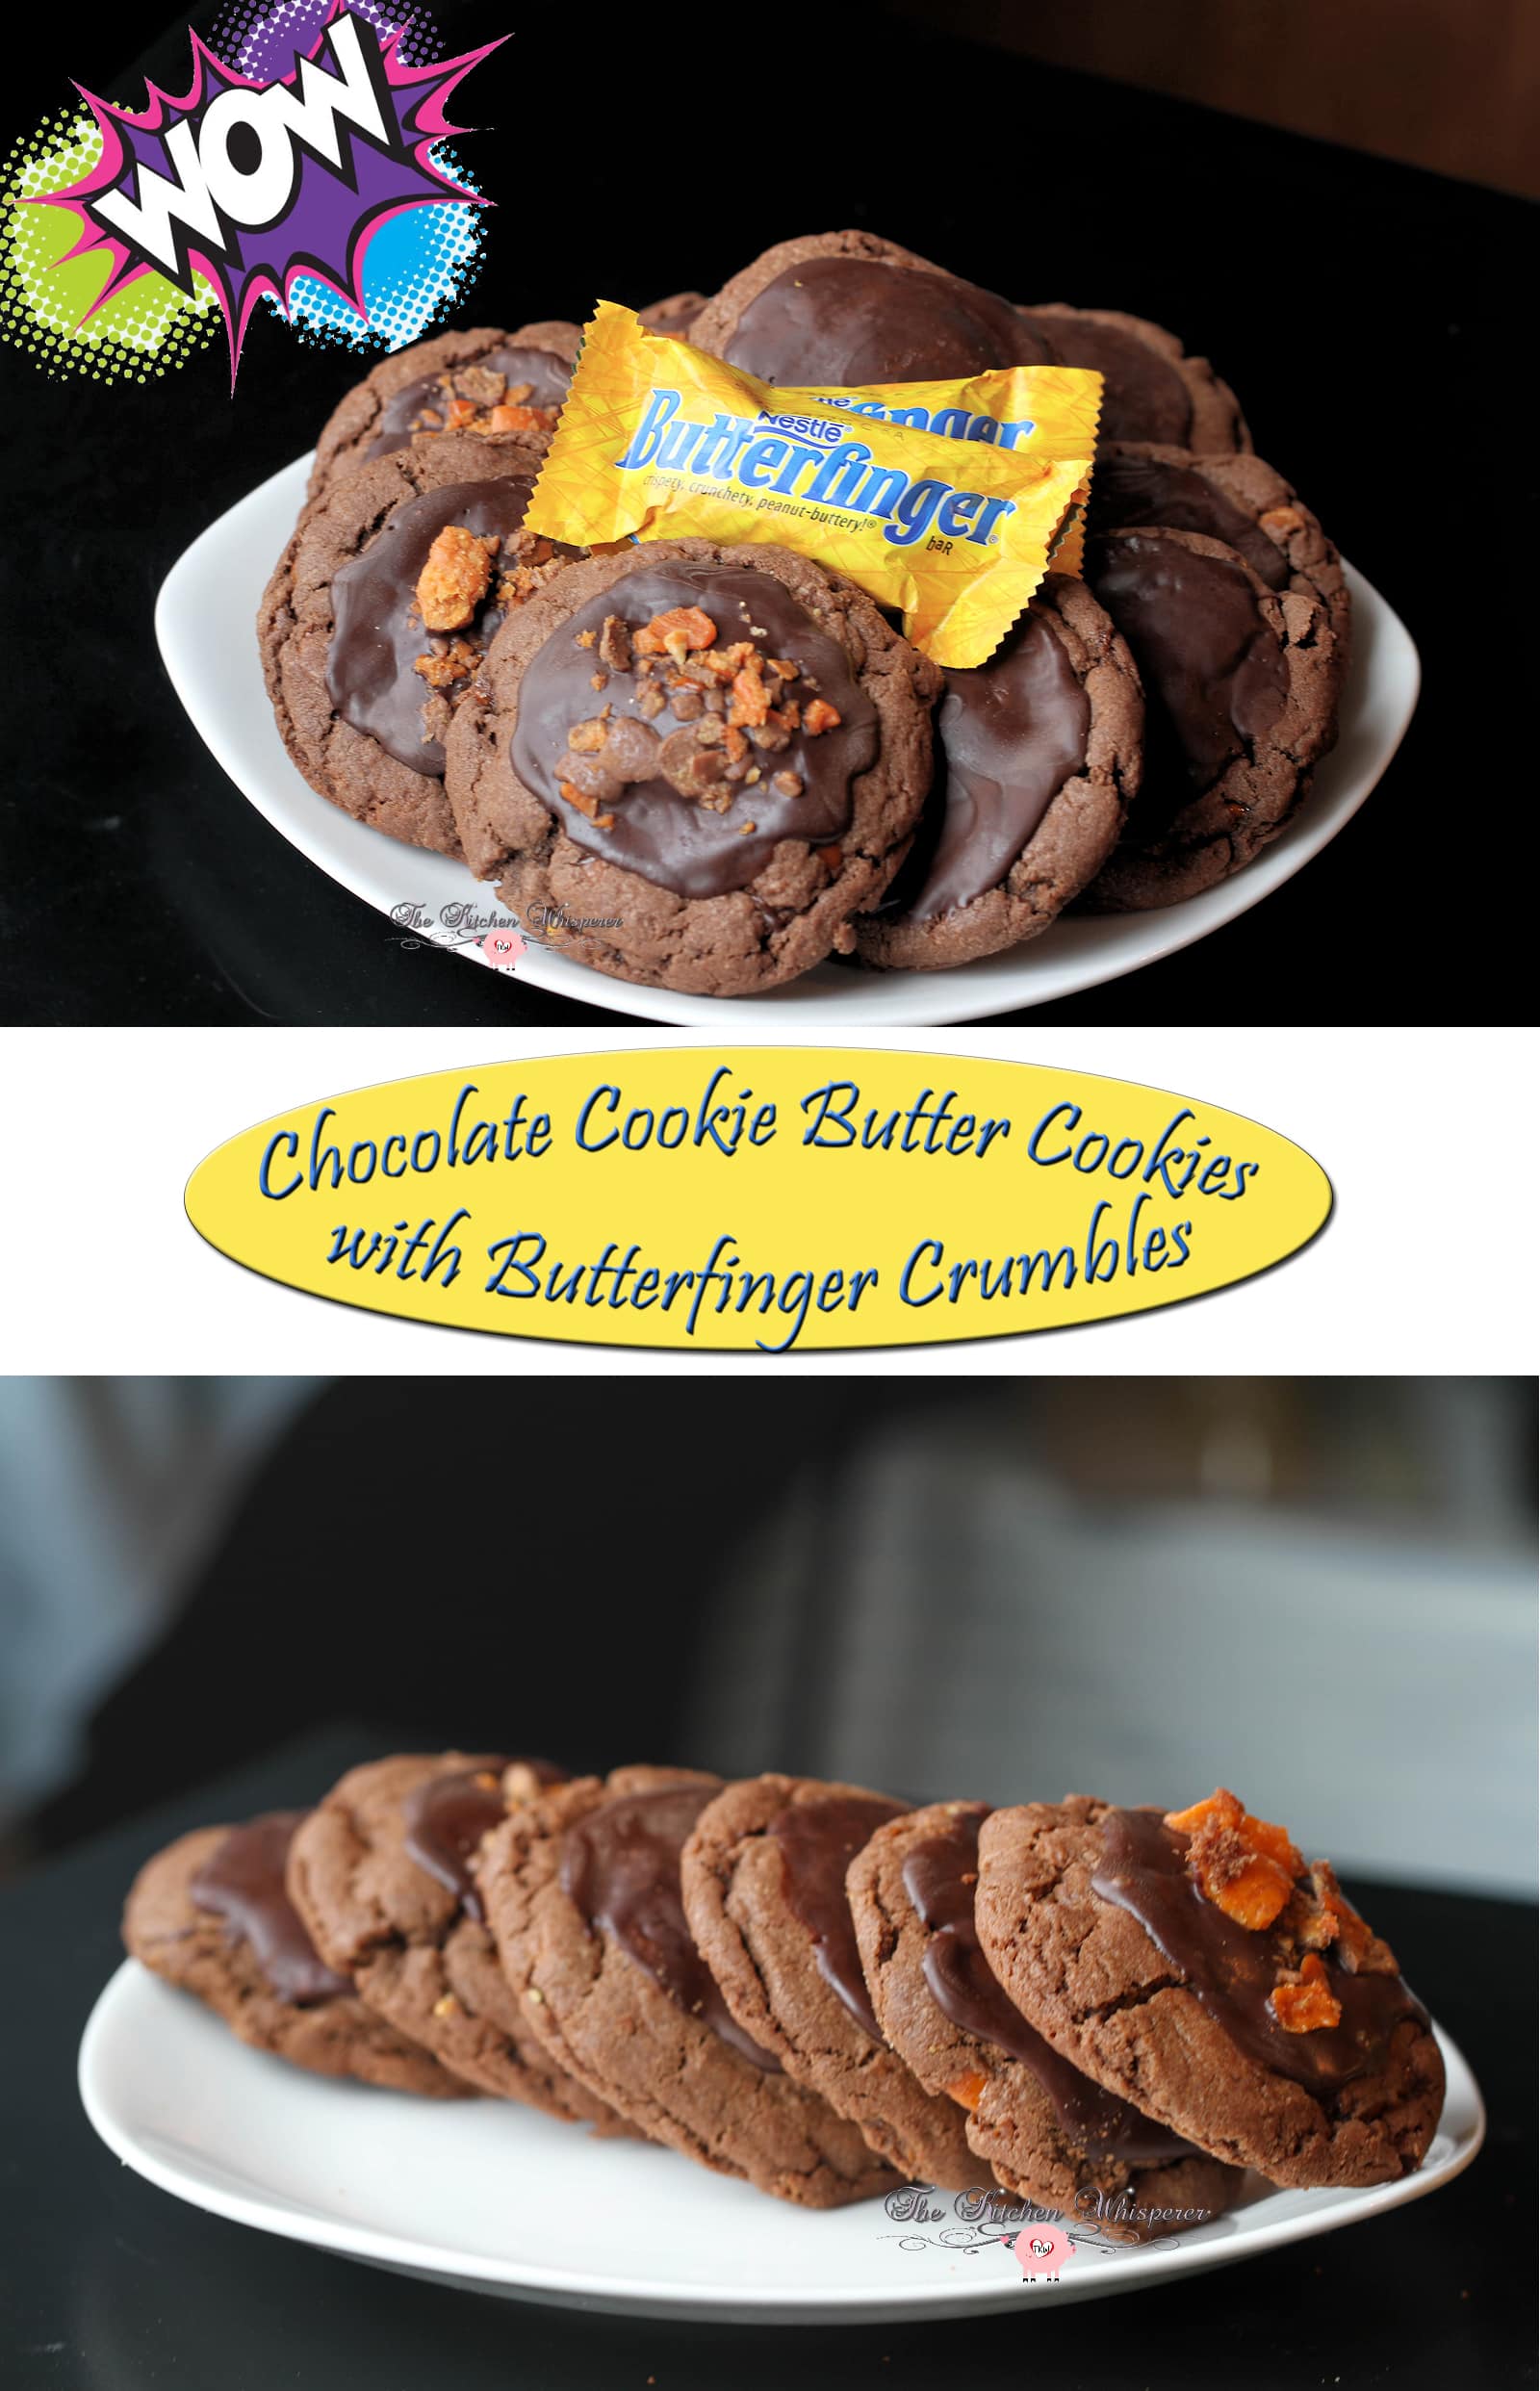 Chocolate Cookie Butter Cookies with Butterfinger Crumbles Collage